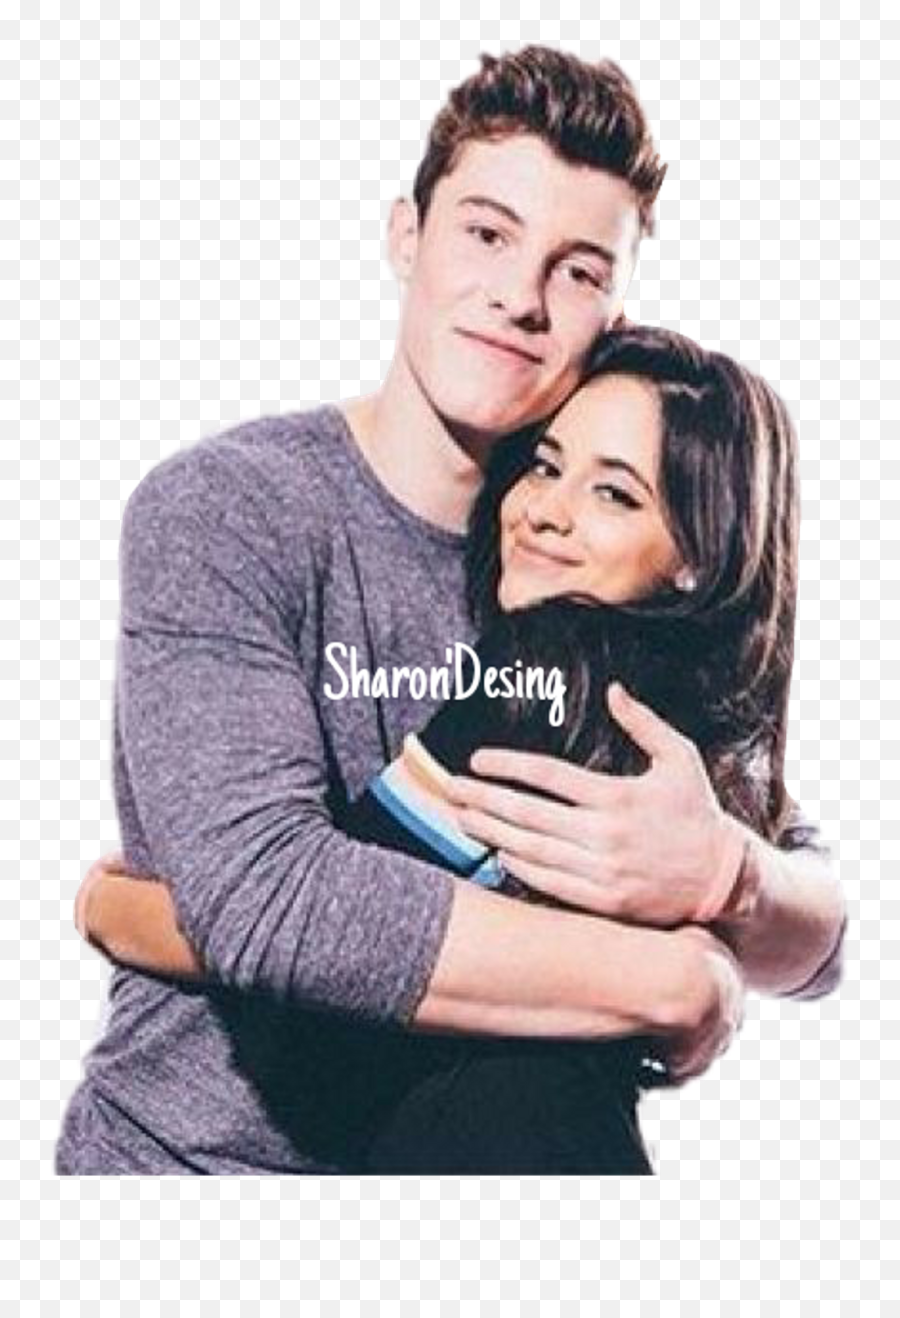 Download Png 3 Camila Cabello Y Shawn Mendes - Shawn Camila Cabello And Shawn Mendes Sizze,Camila Cabello Png